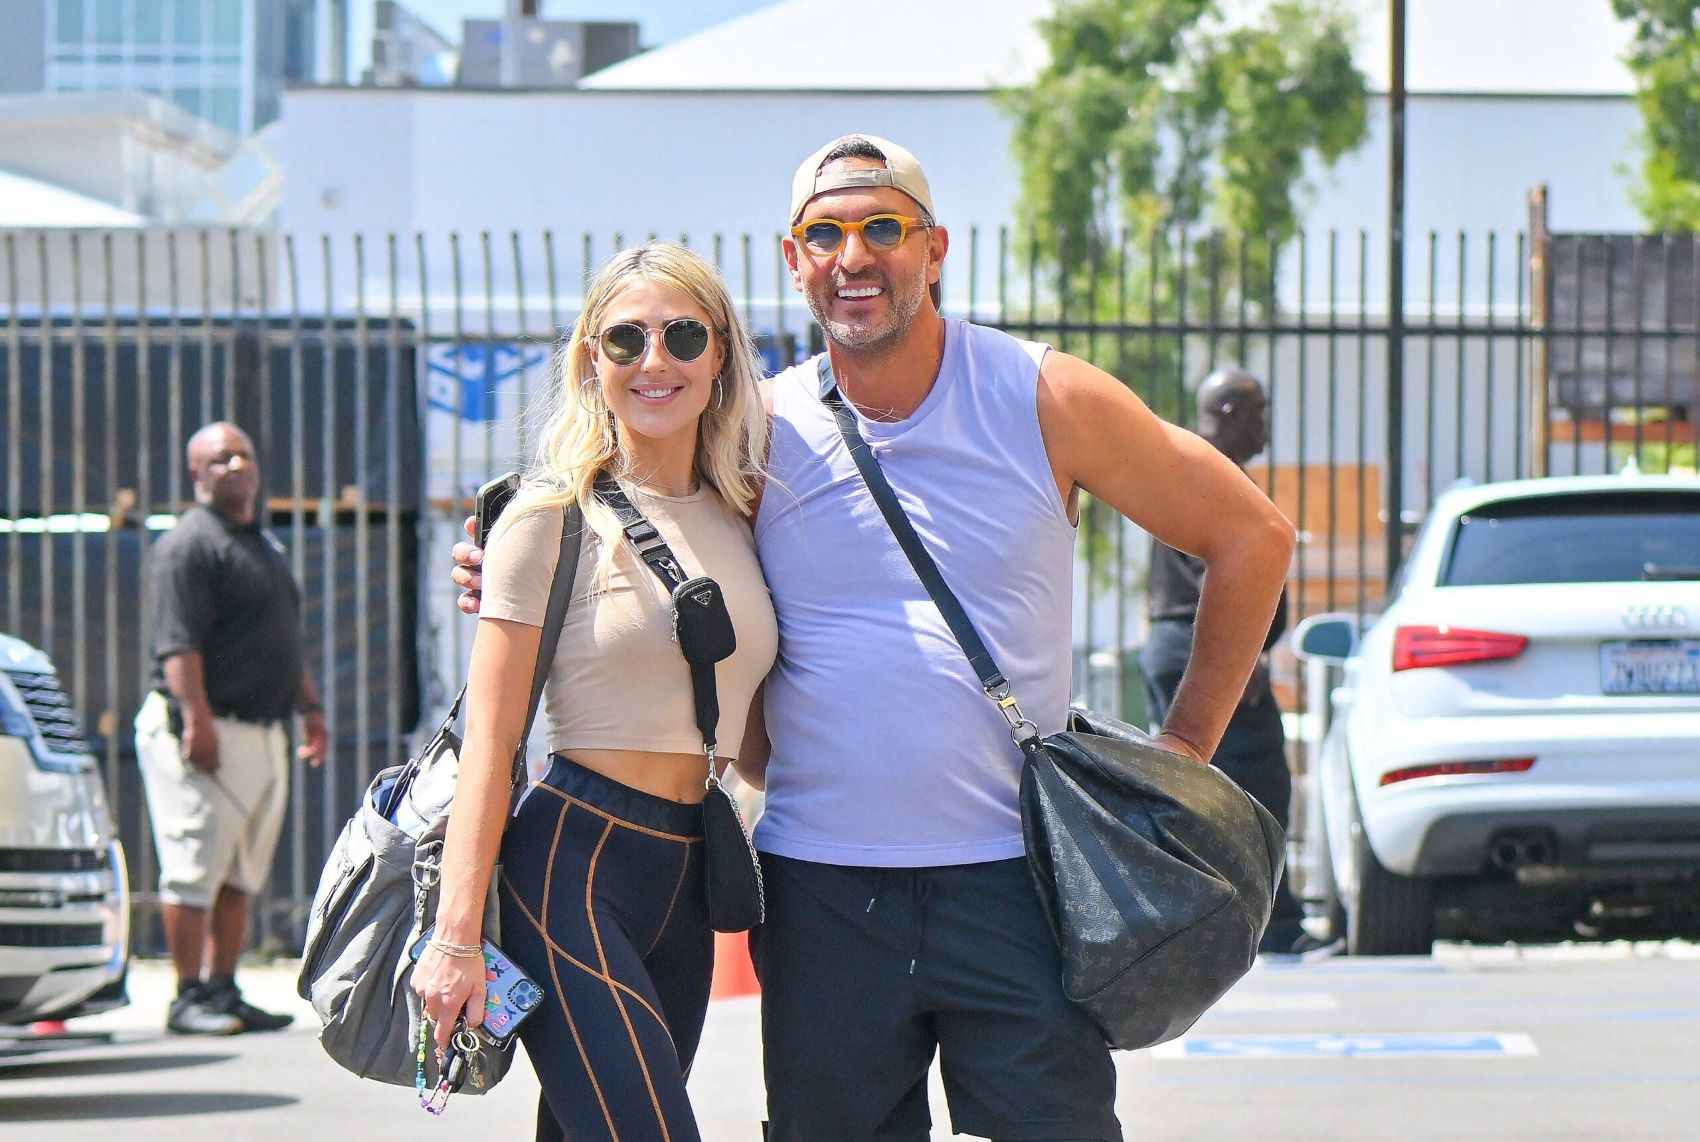 Mauricio Umansky And Emma Slater Seen Together Again In L.A.